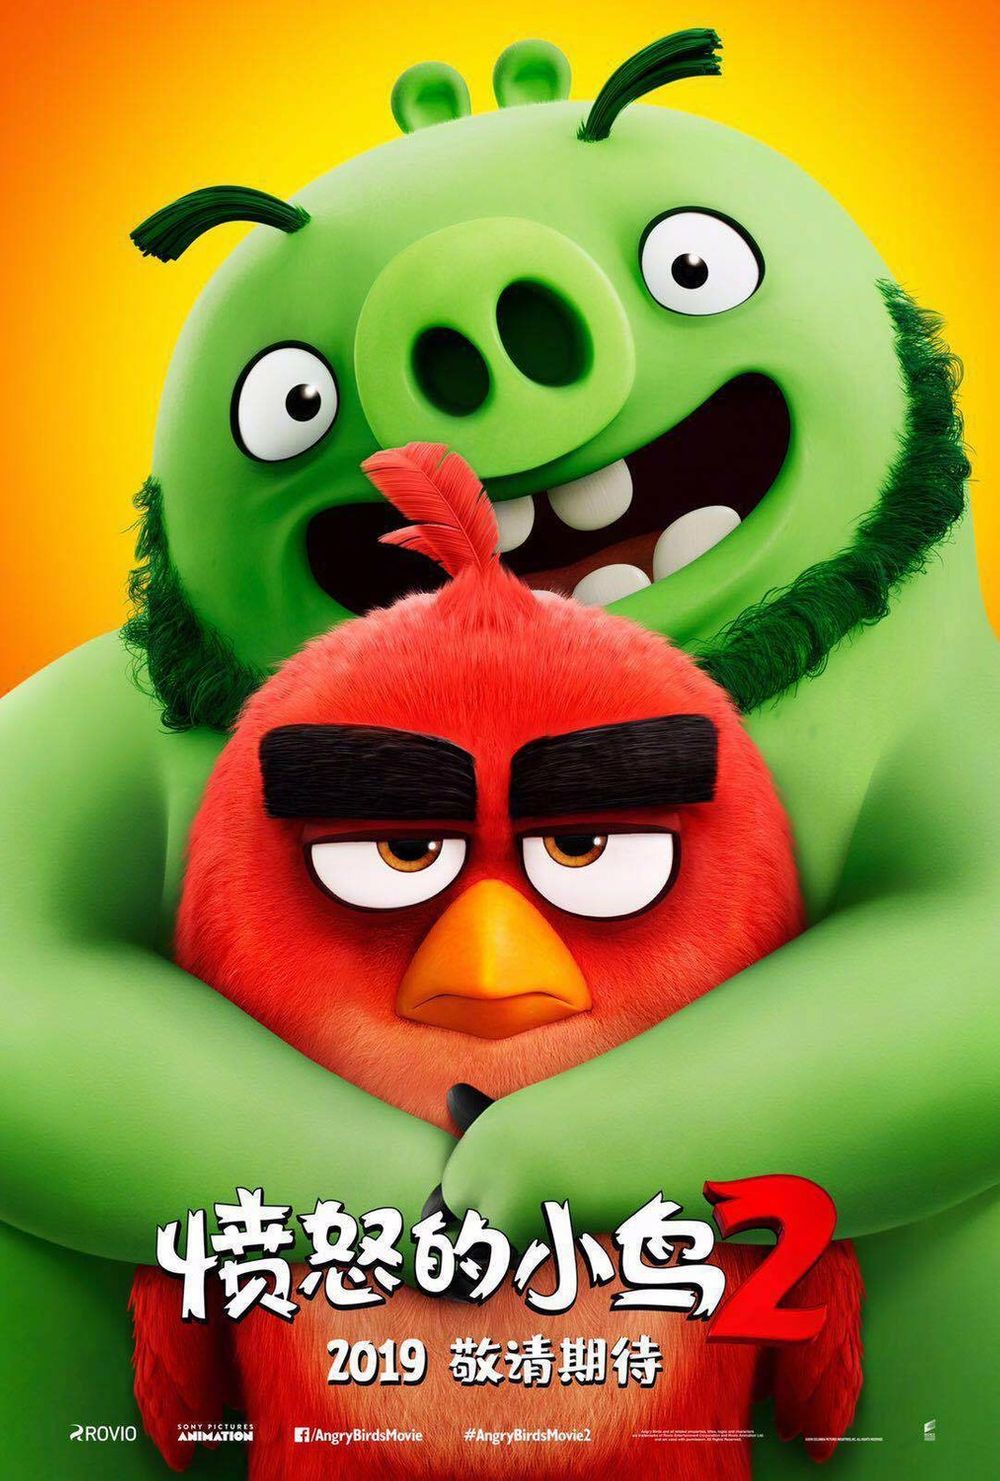 The Angry Birds Movie 2 Movie Review